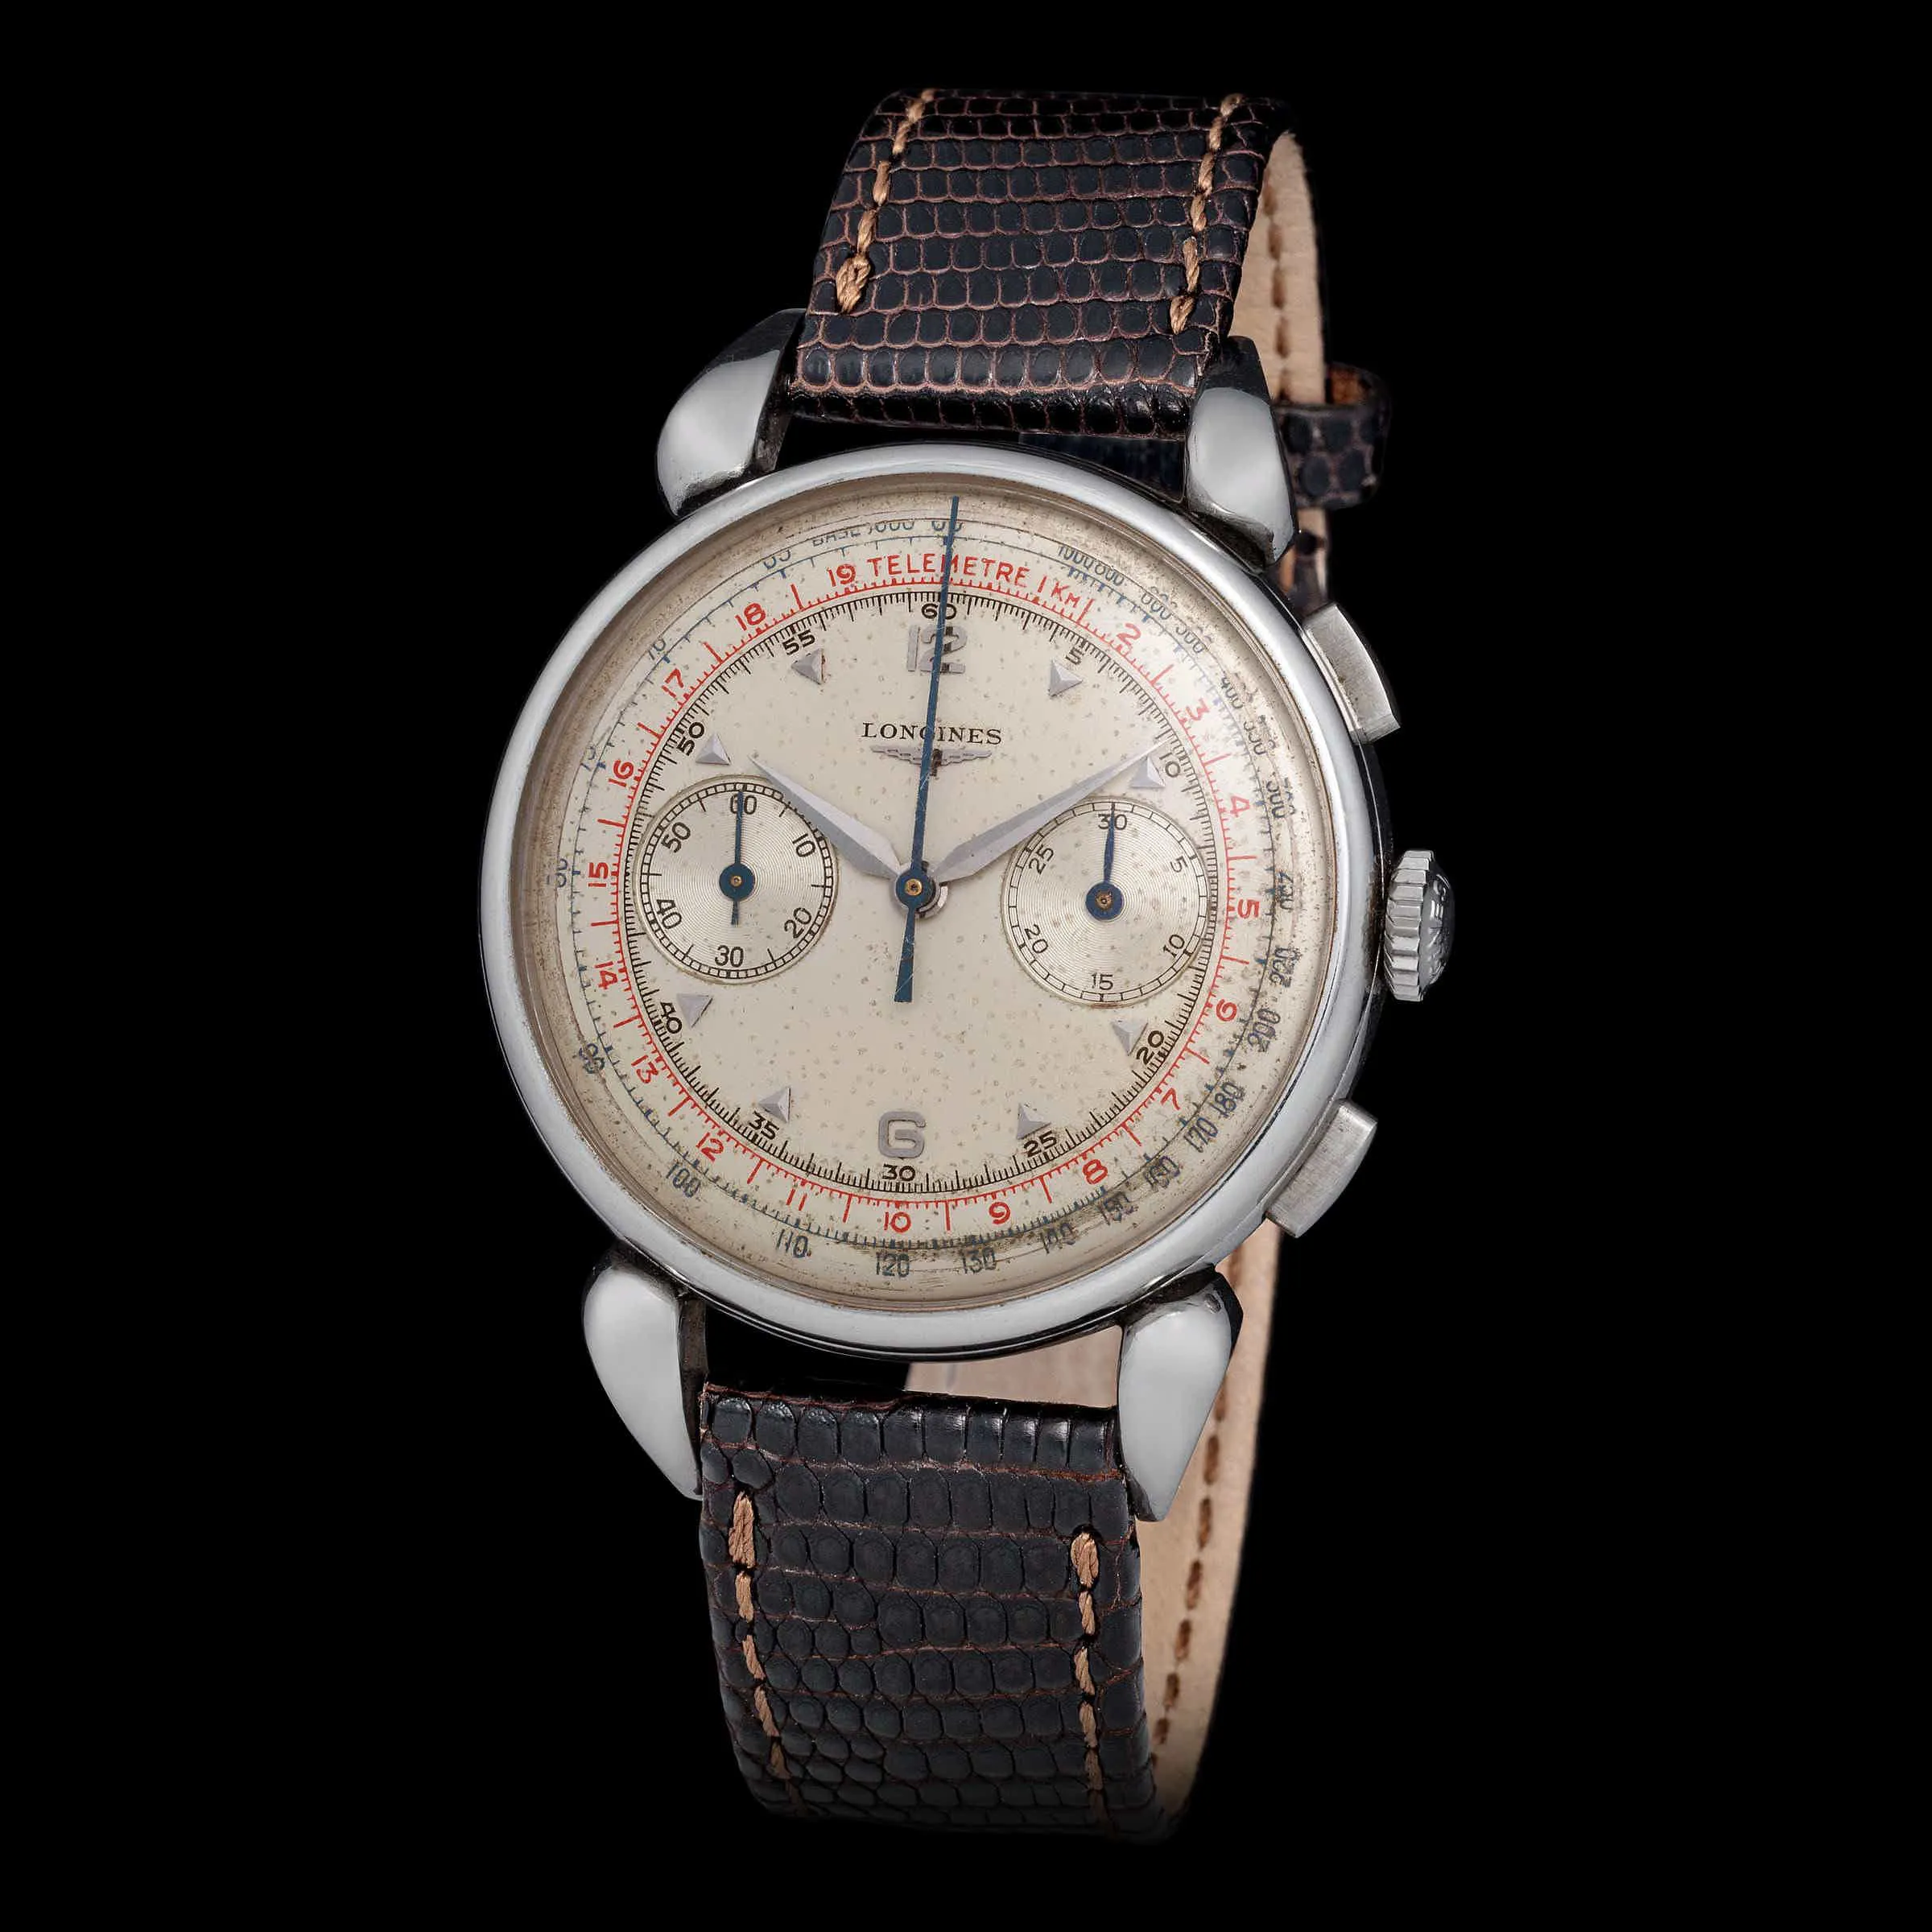 Longines Flyback Chronograph 23505 nullmm